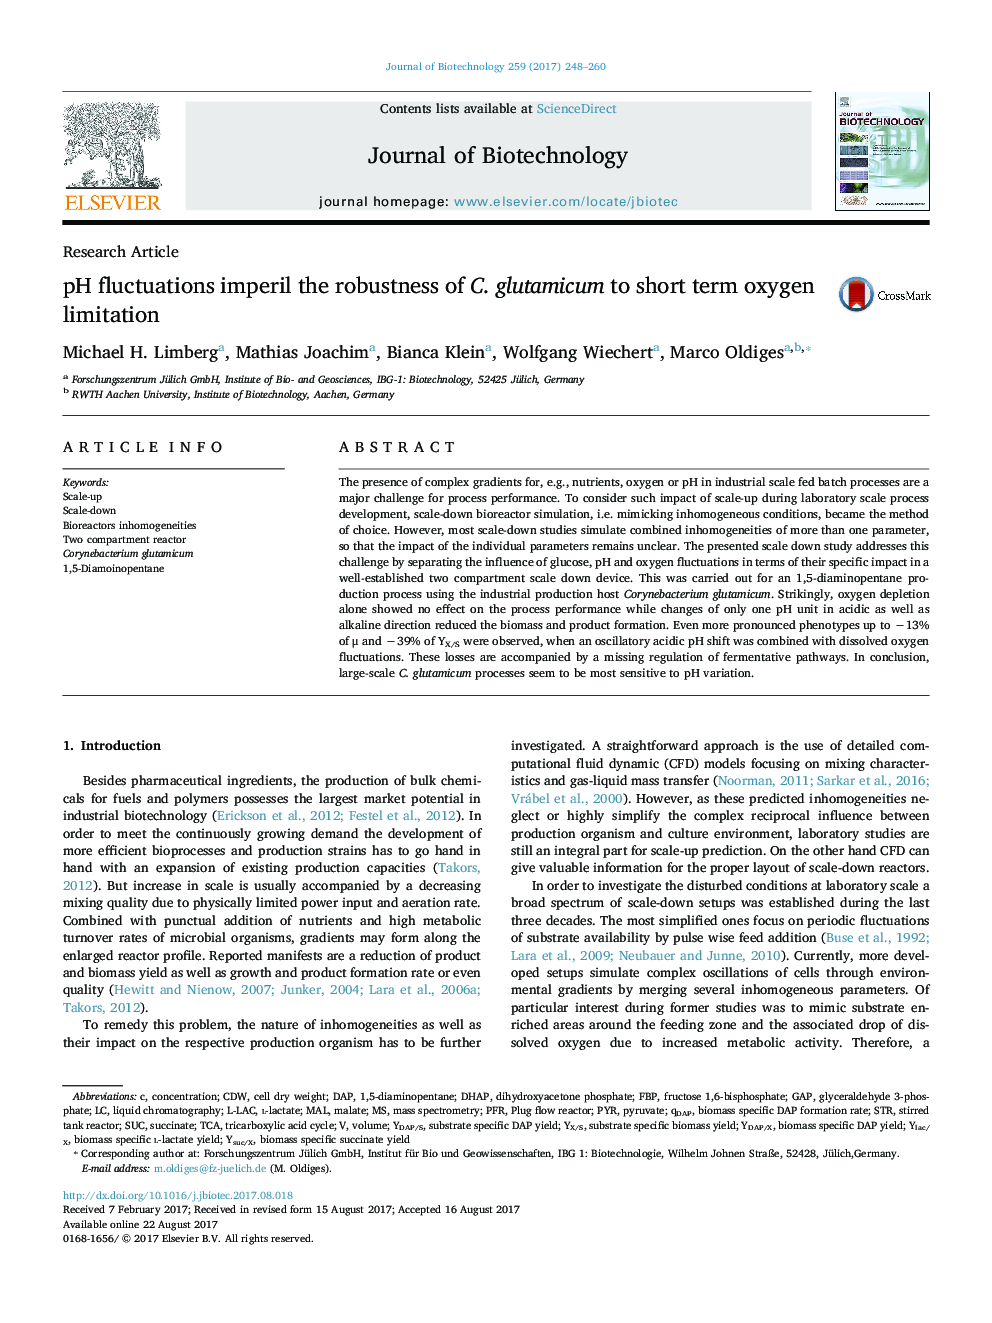 Research ArticlepH fluctuations imperil the robustness of C. glutamicum to short term oxygen limitation